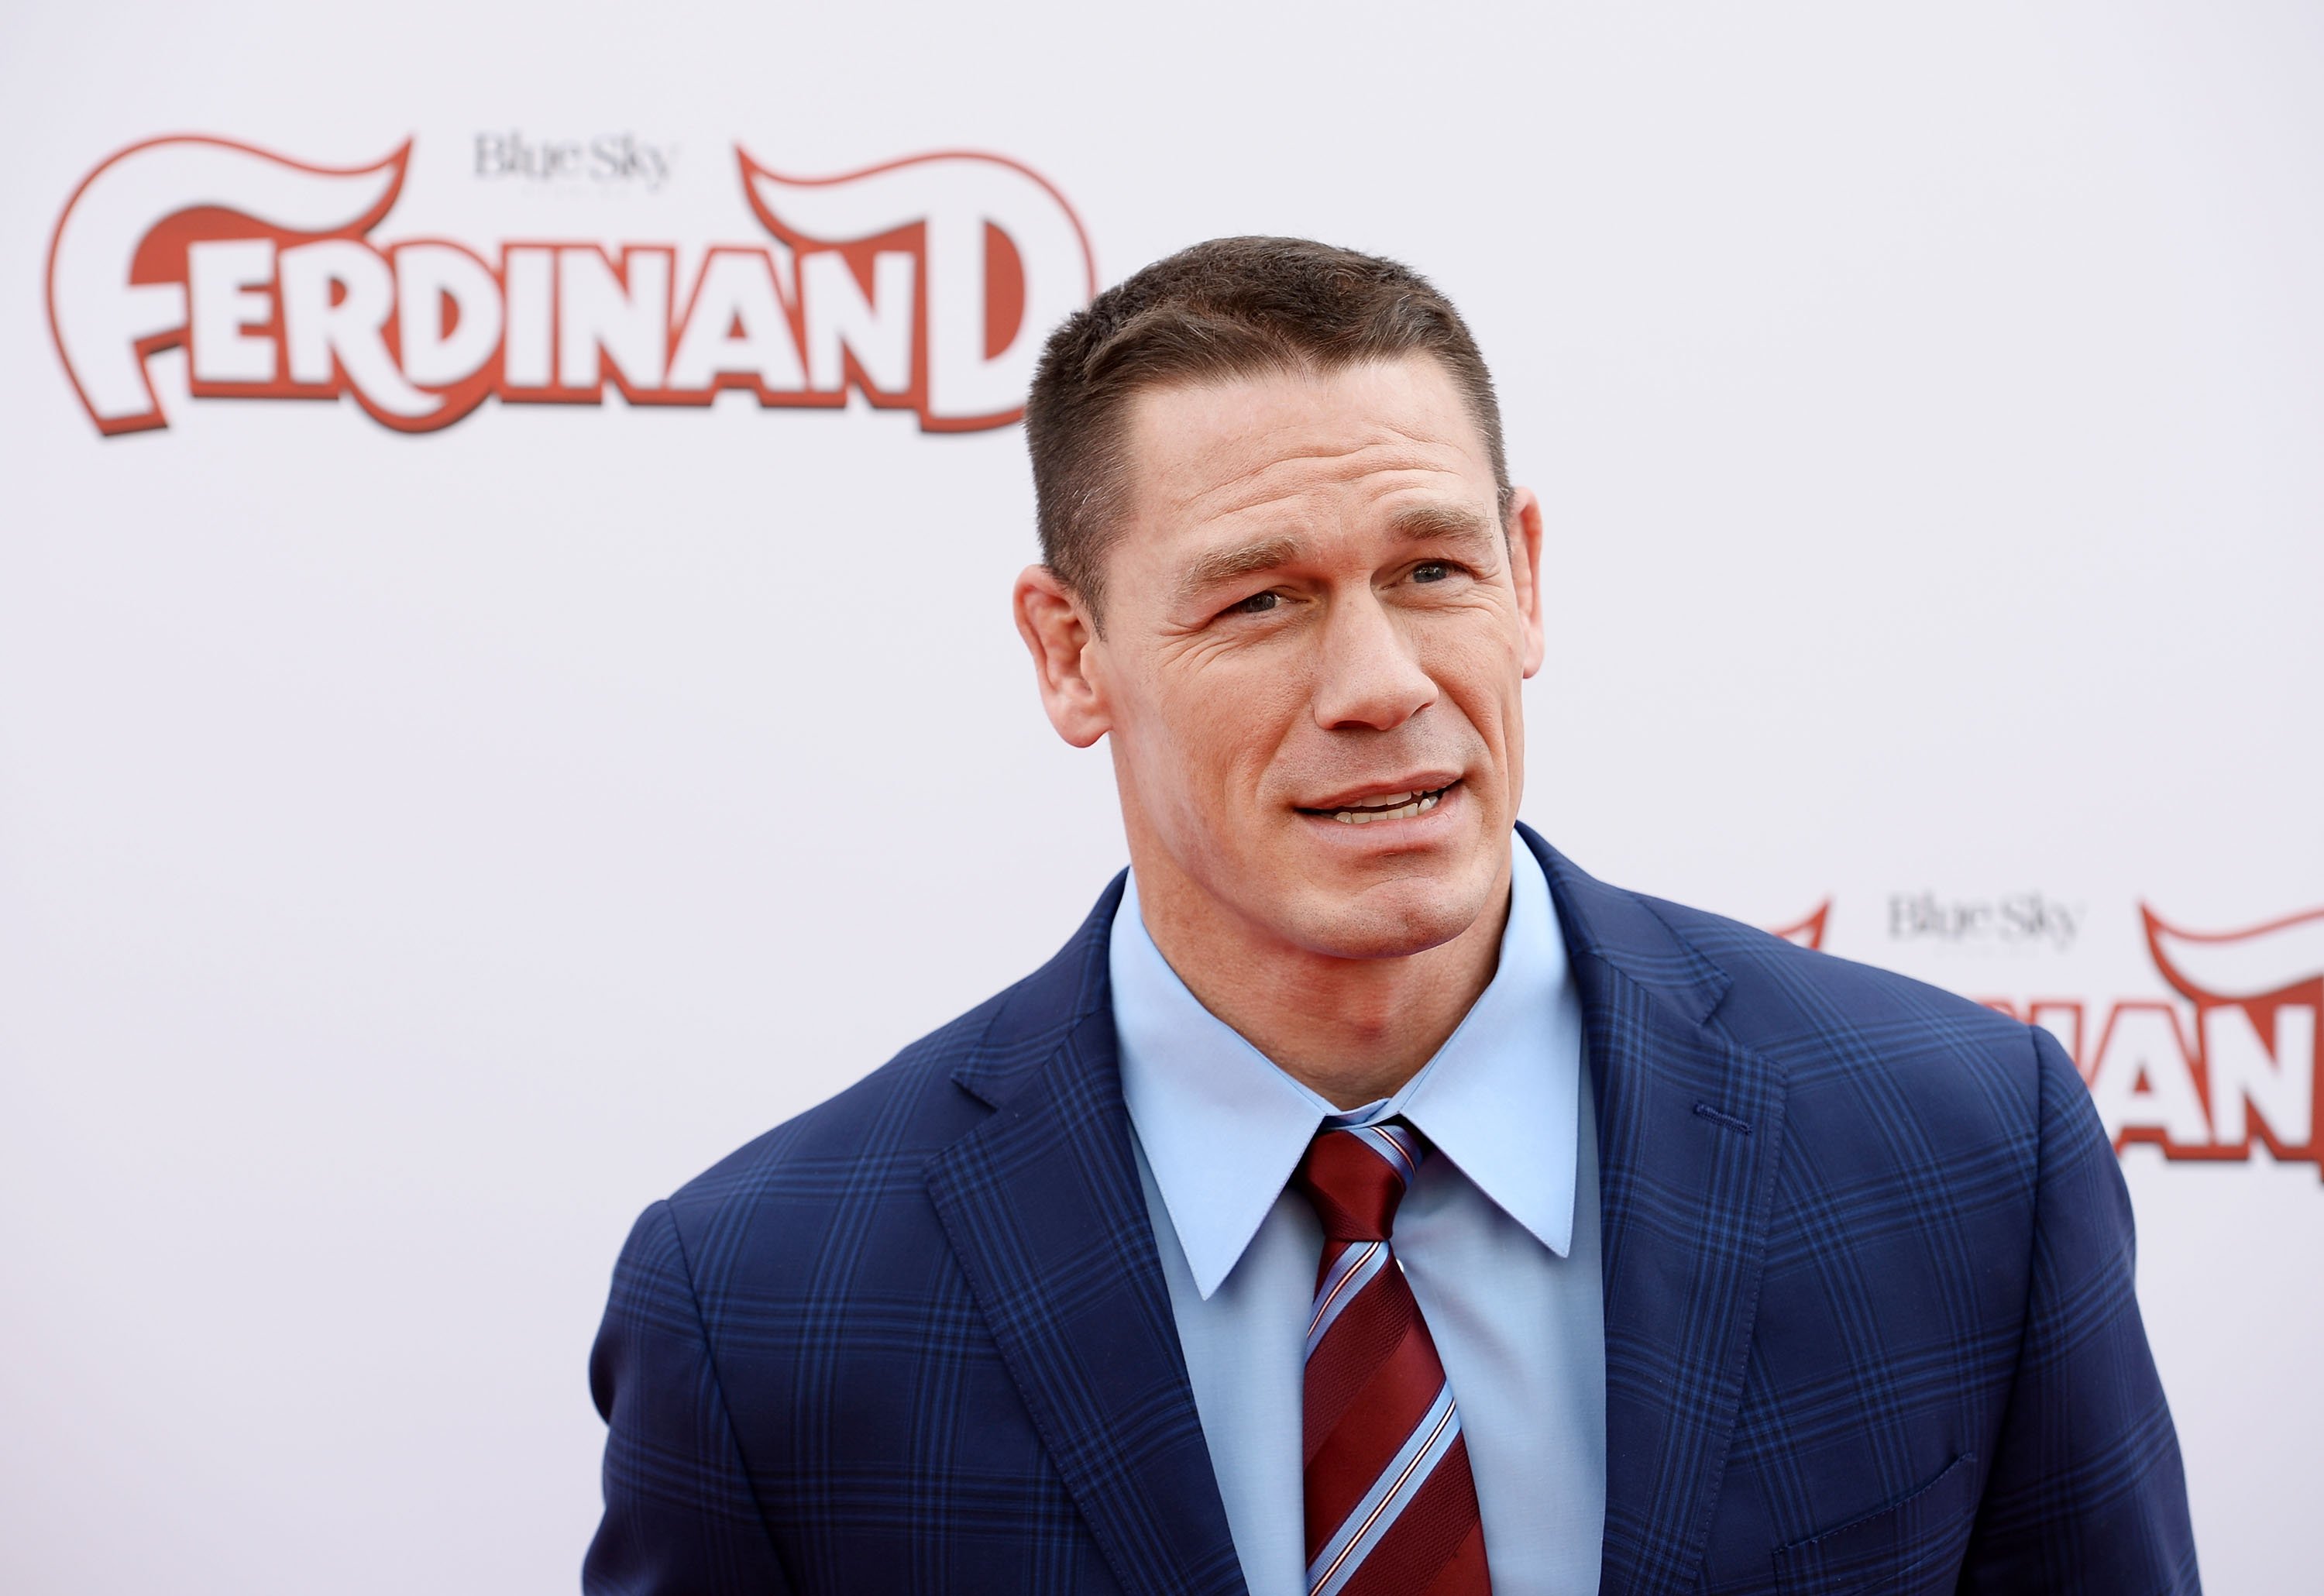 John Cena On Setting Goals For The New Year, WWE Looks At William Regal’s Final Match, Indie Wrestler Talks Coming Out As Gay After Finding Love